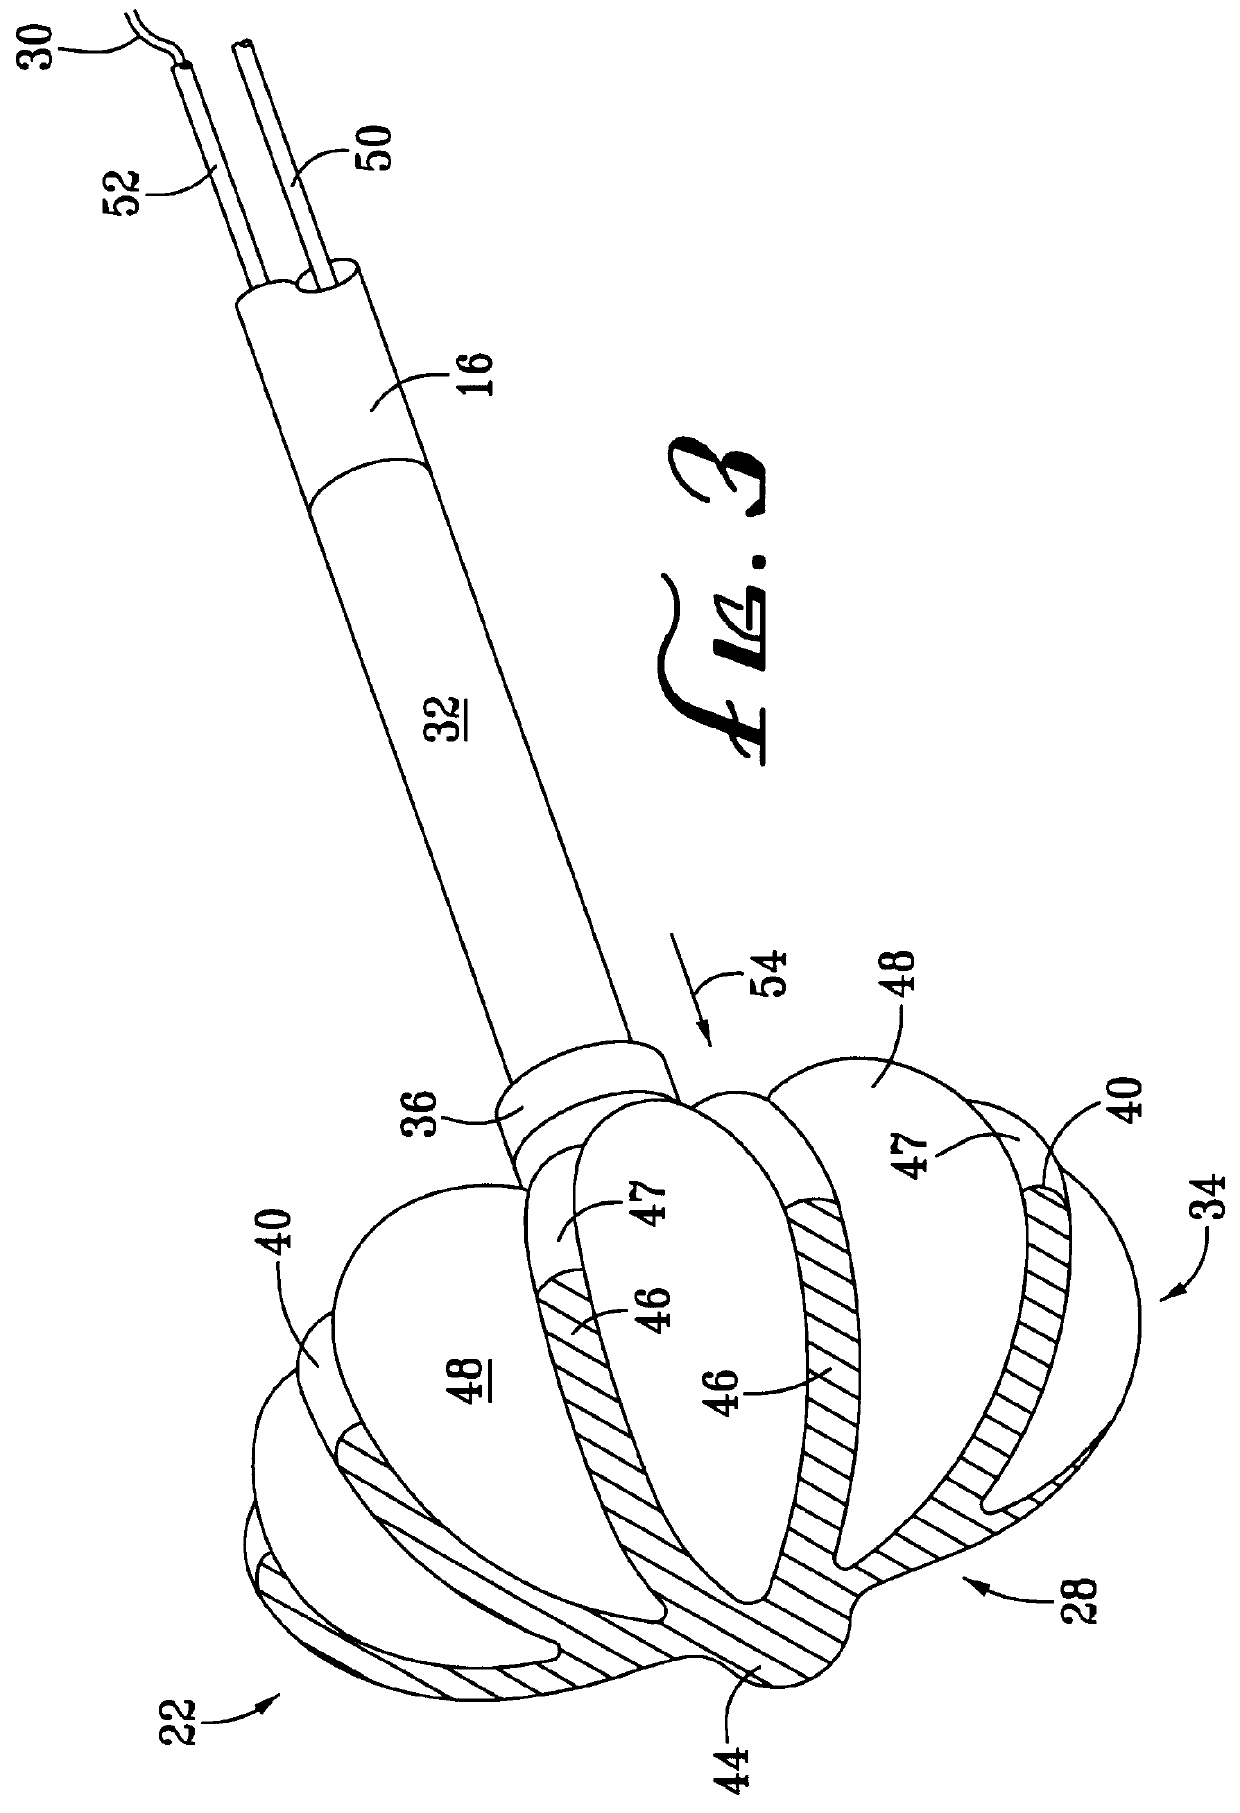 Collapsible spline structure using a balloon as an expanding actuator